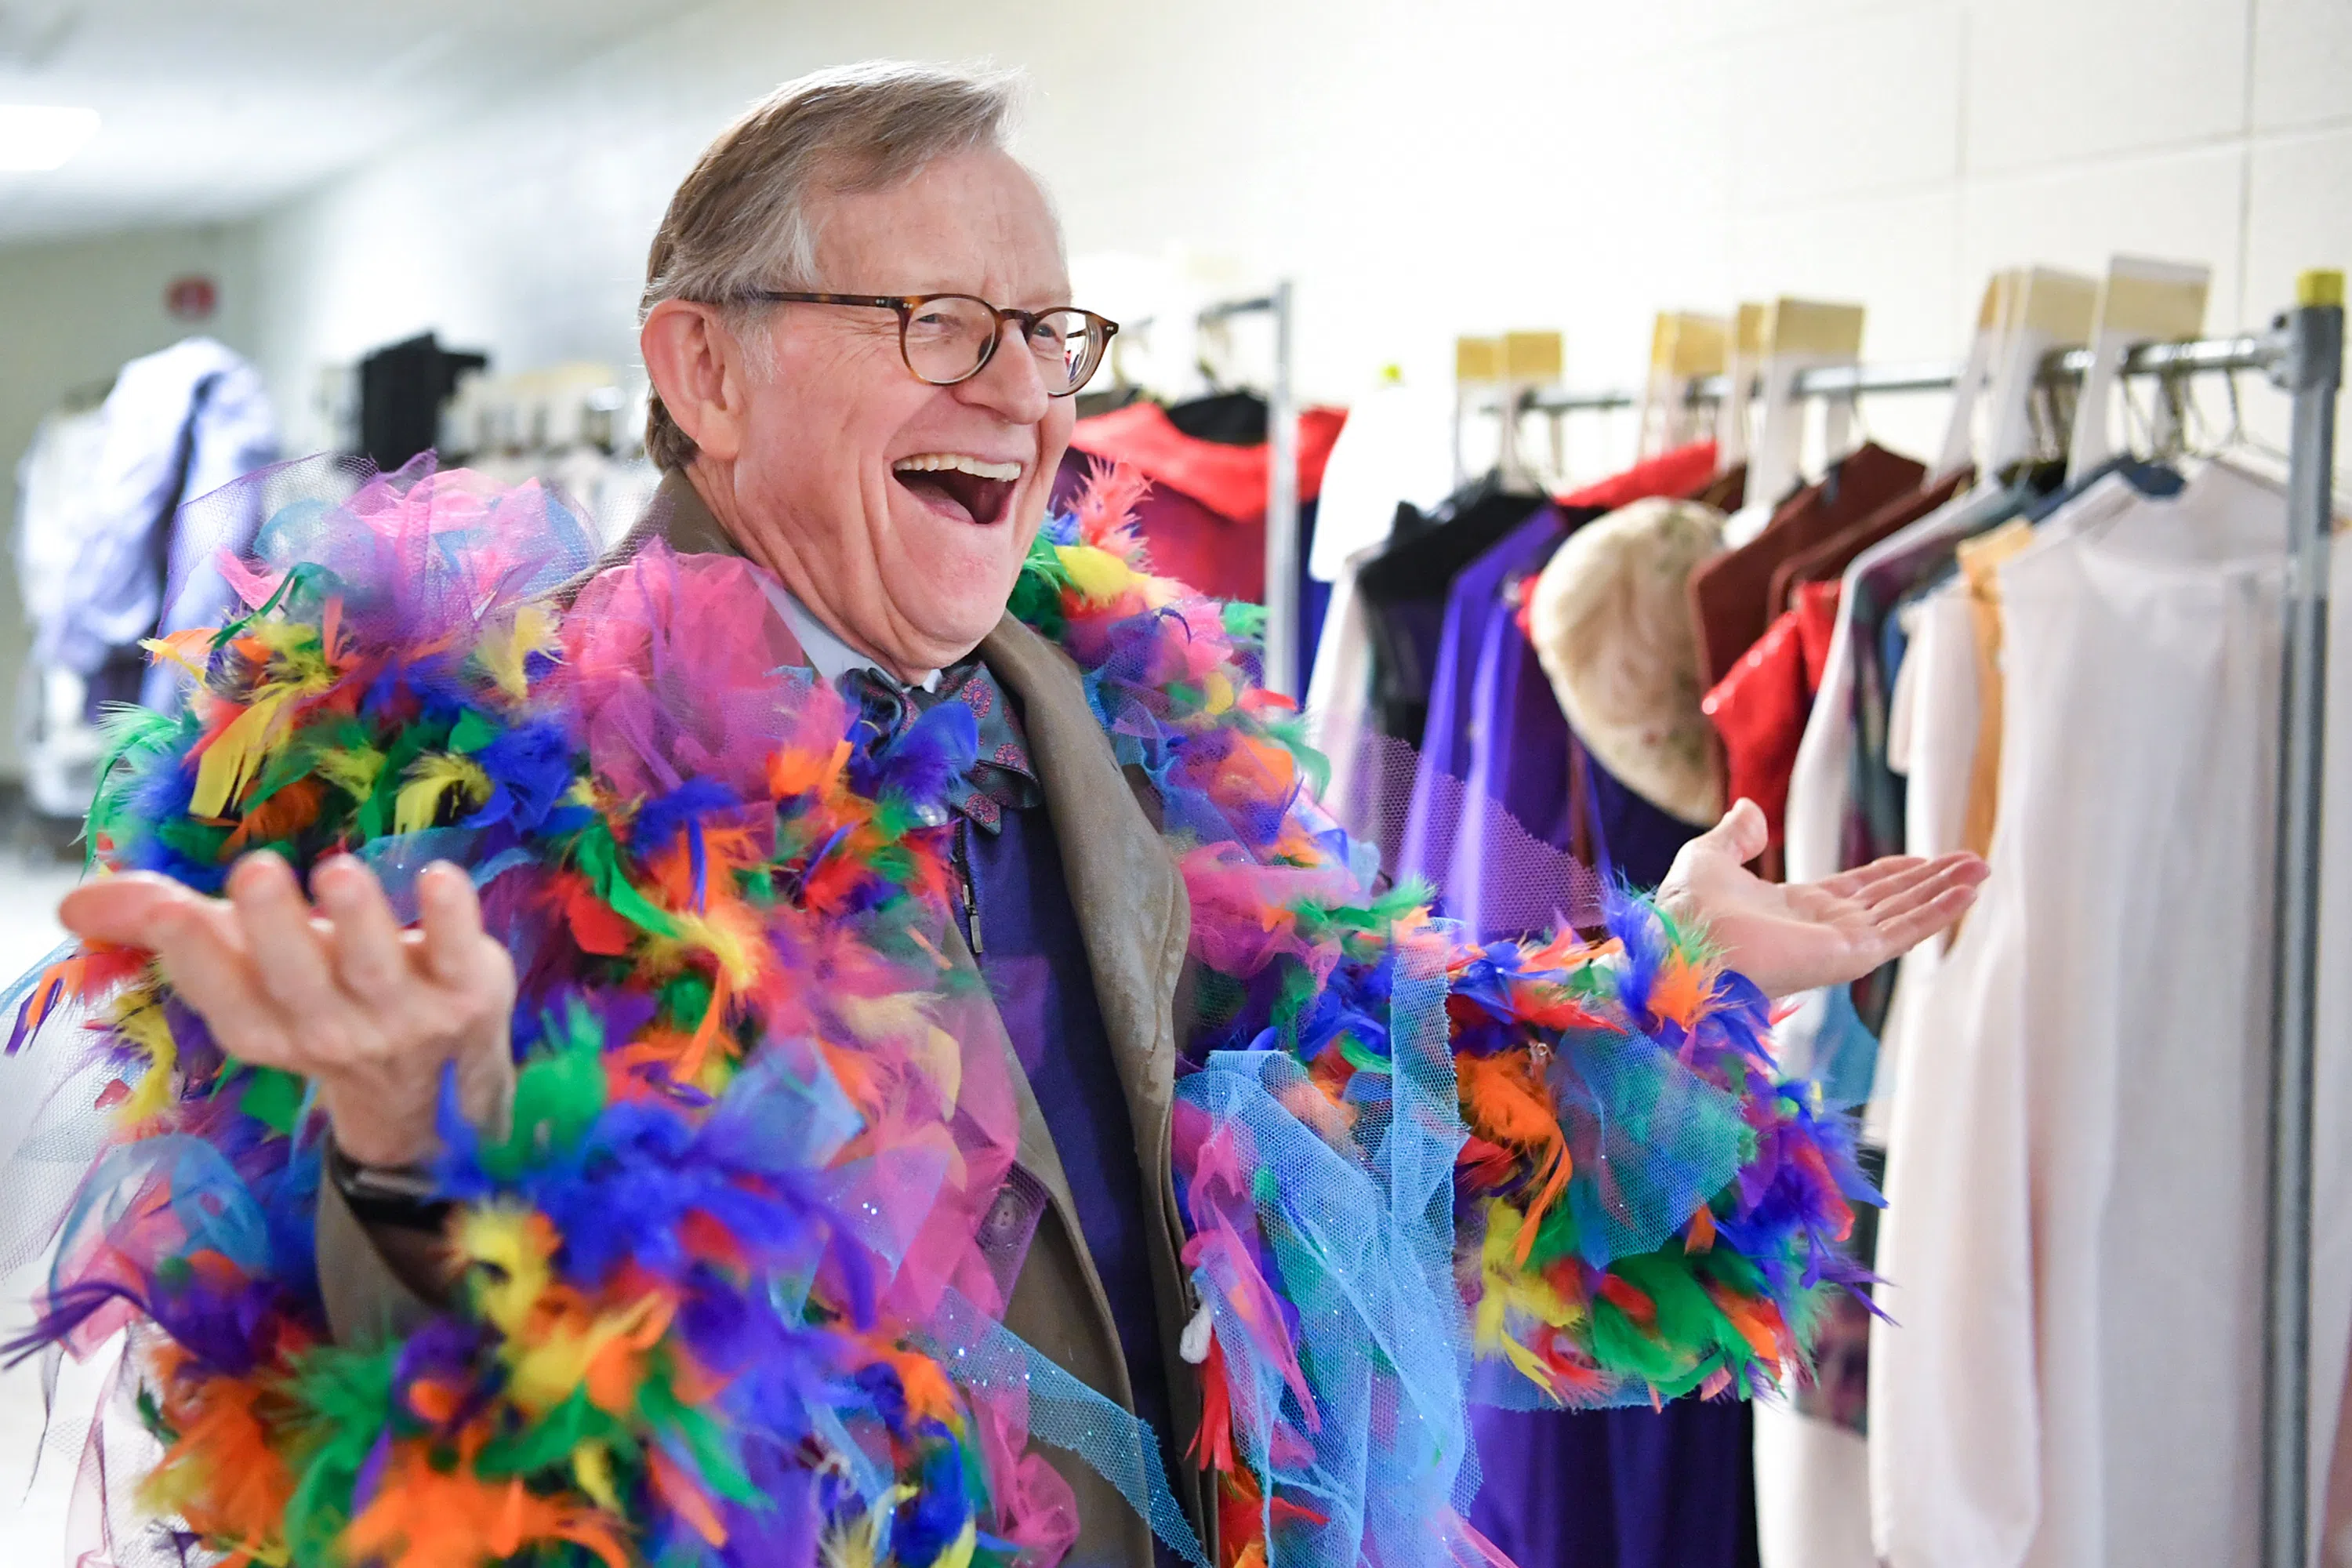 Gordon Gee holds out his arms as he wears a coat covered in rainbow feathers